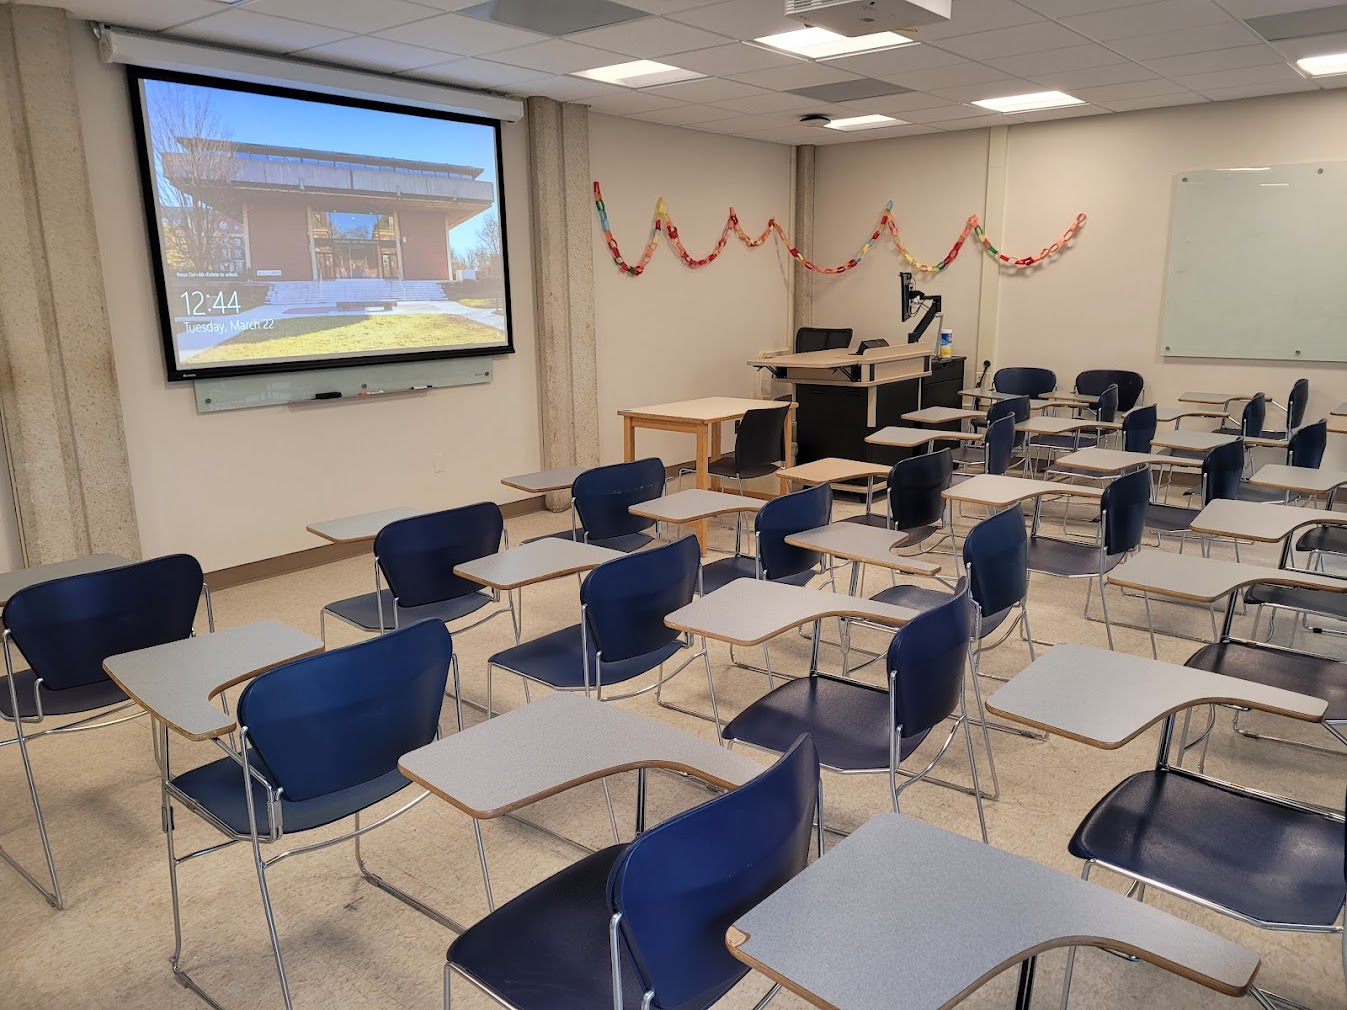 A view of the classroom with movable tableted arm chairs, glass board, and instructor table in front.